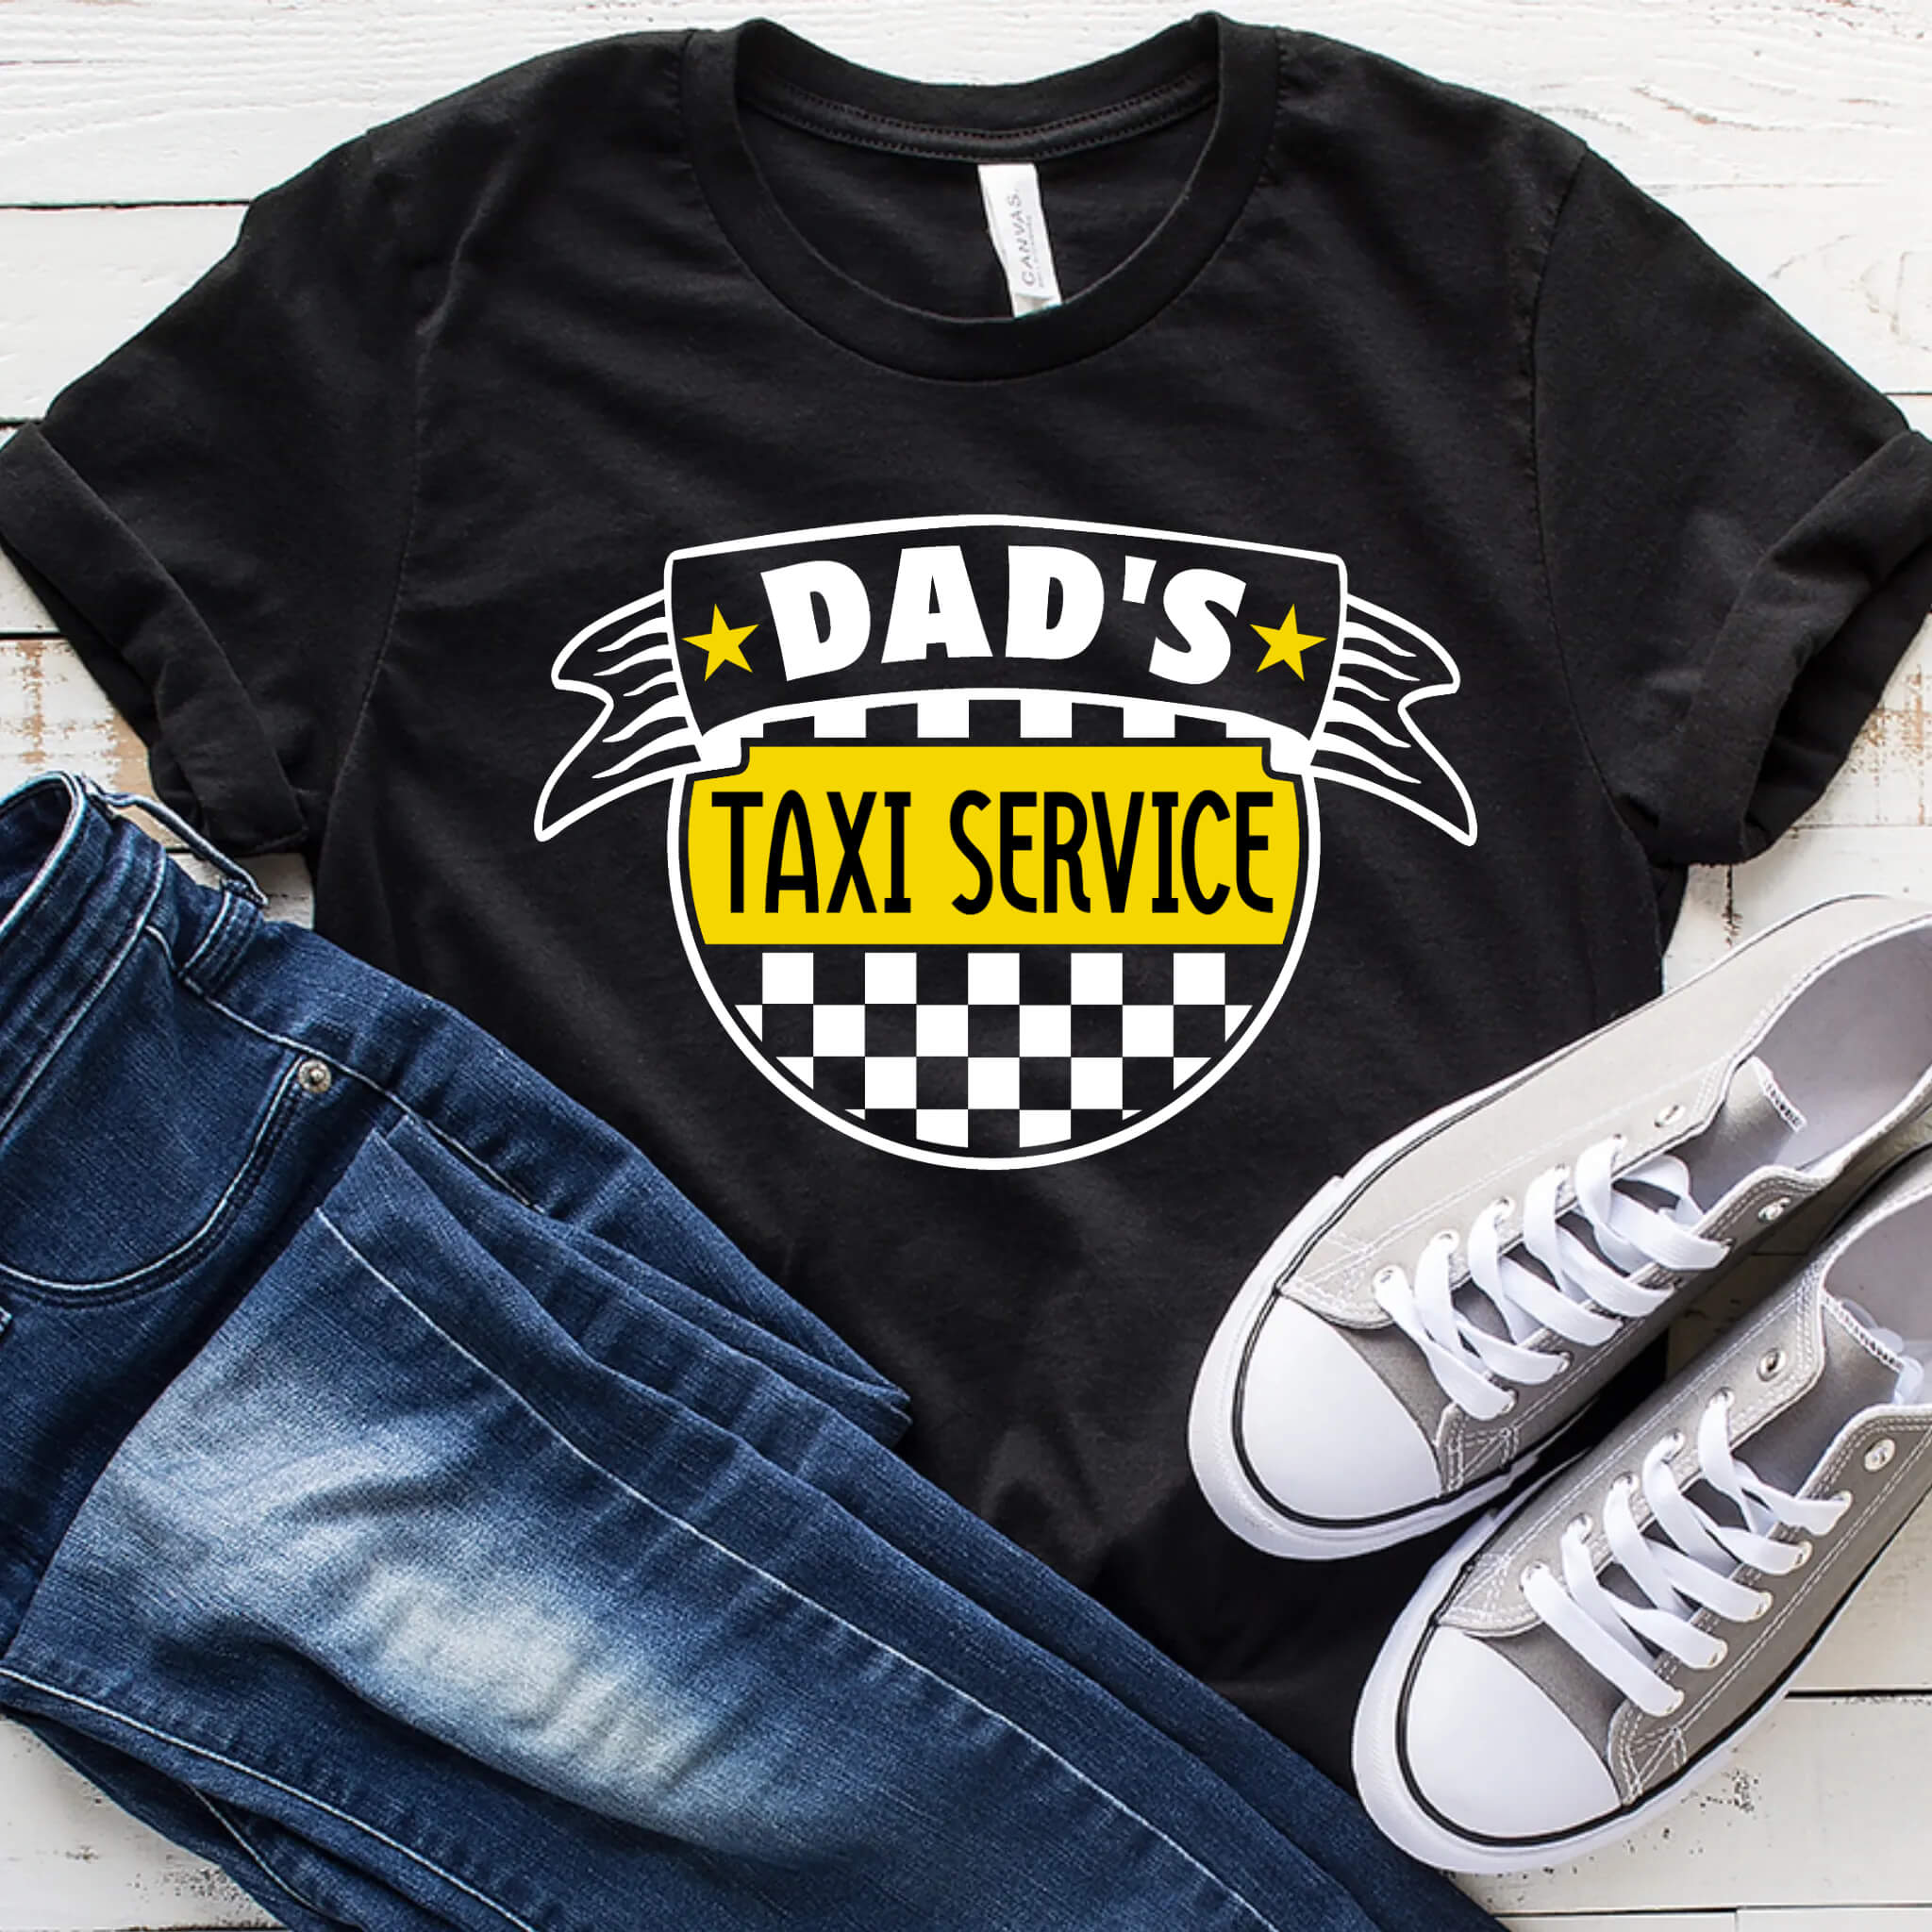 Dad's Taxi Service T-Shirt Birthday Christmas Father's Day Husband Guys Mens Gift